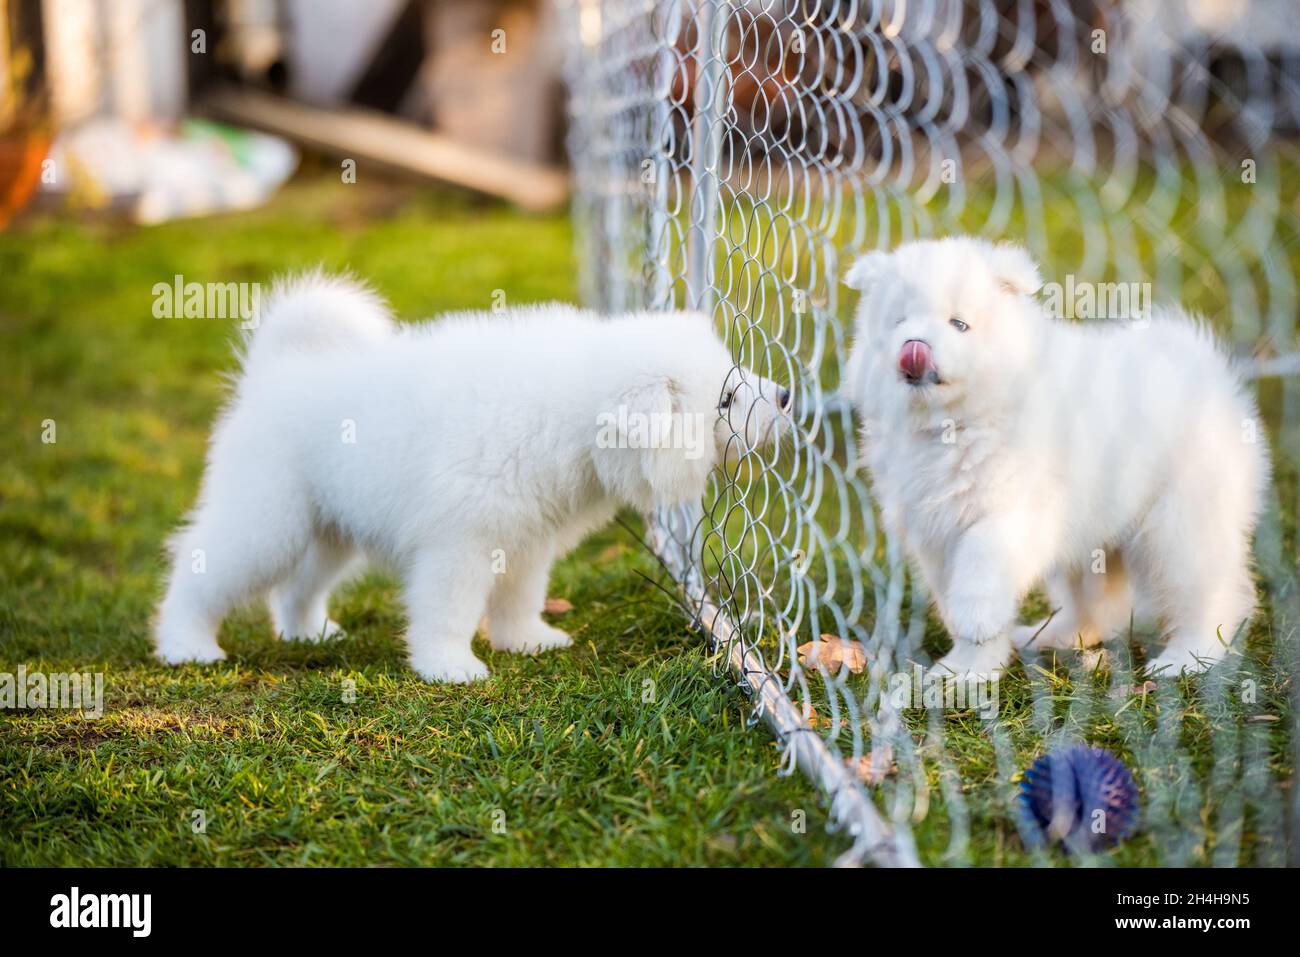 Funny fluffy white Samoyed puppies dogs are playing. Stock Photo